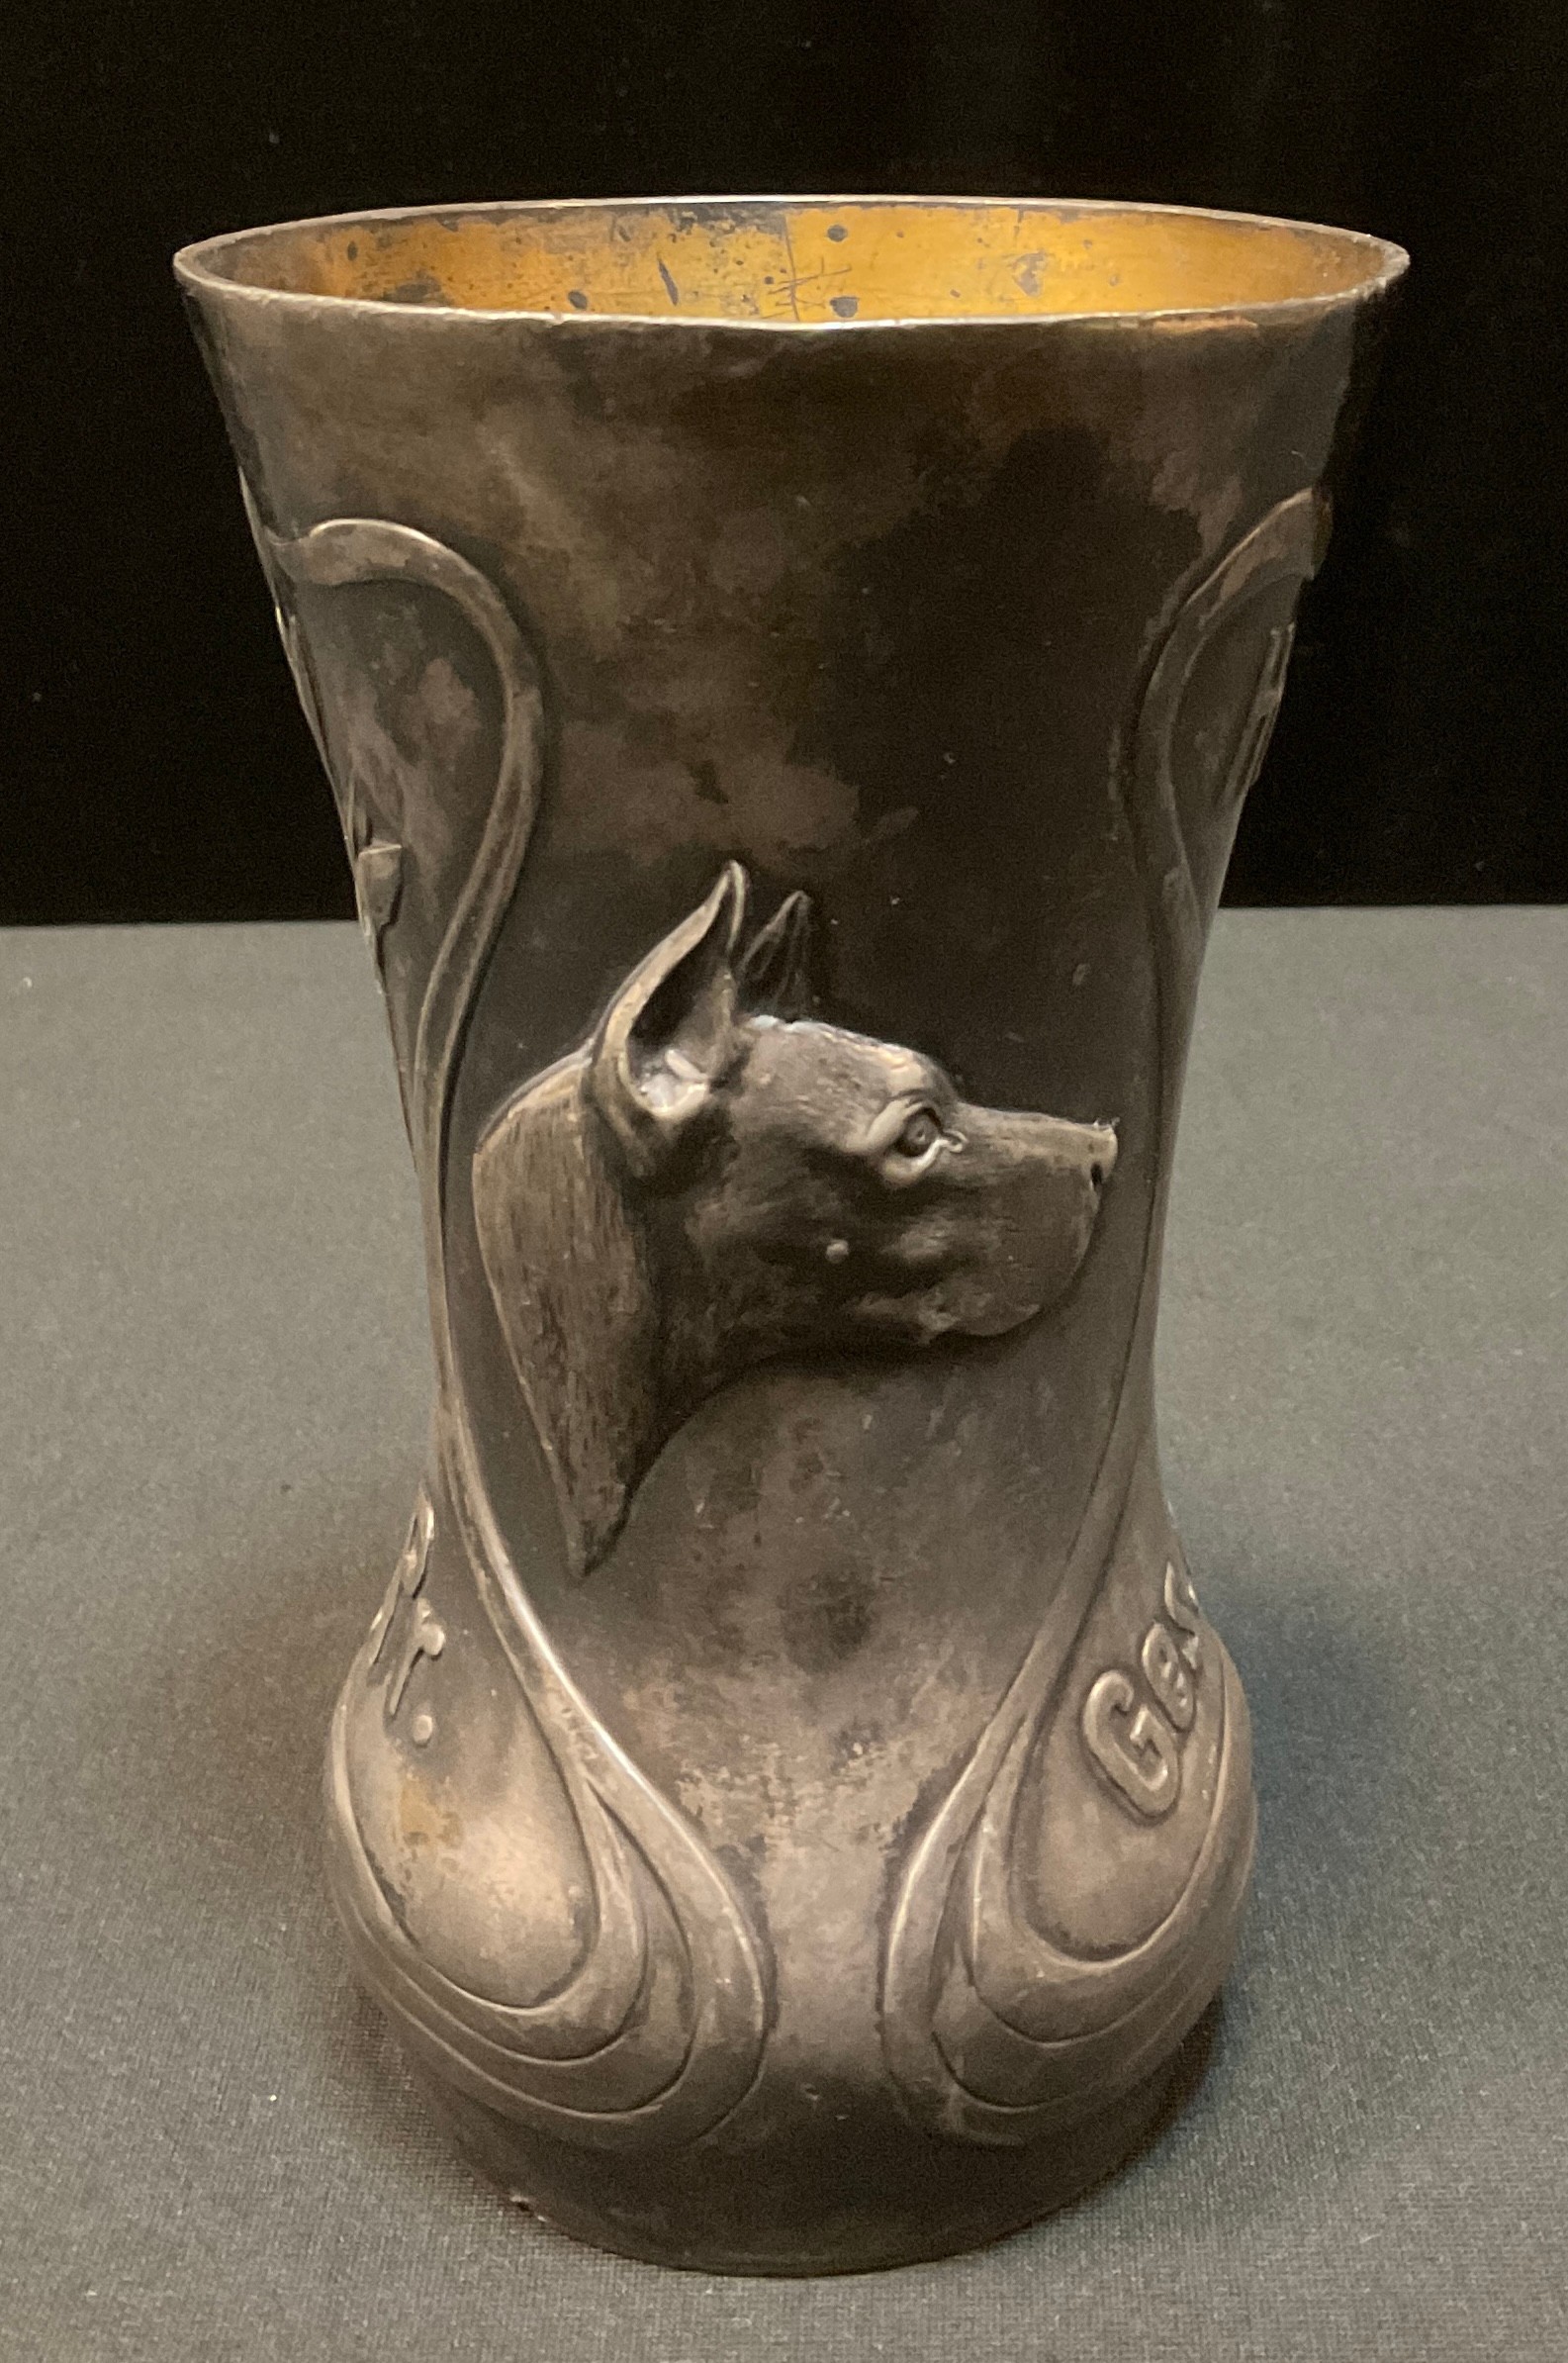 An early 20th century German pewter waisted cylindrical vase, embossed with sinuous scrolls, flowers